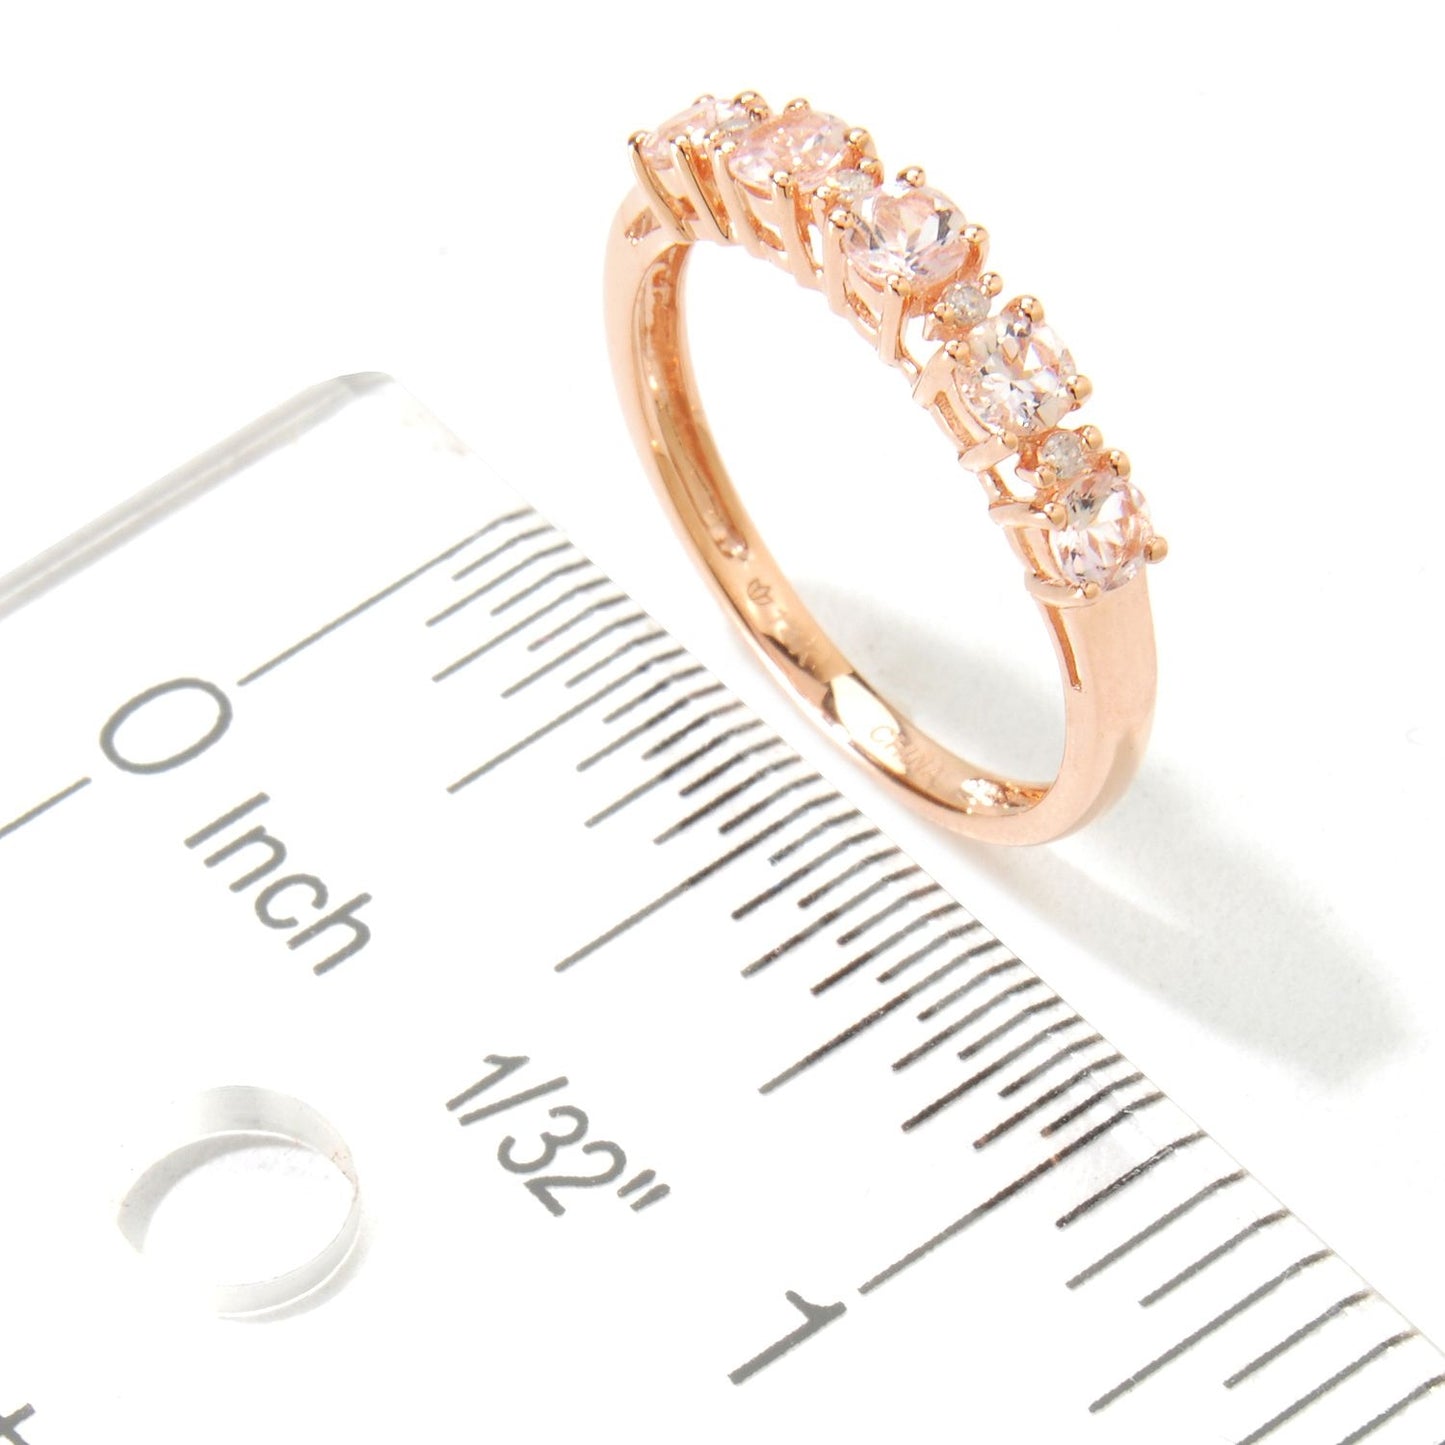 10k Rose Gold Morganite and Diamond Accented Stackable Ring